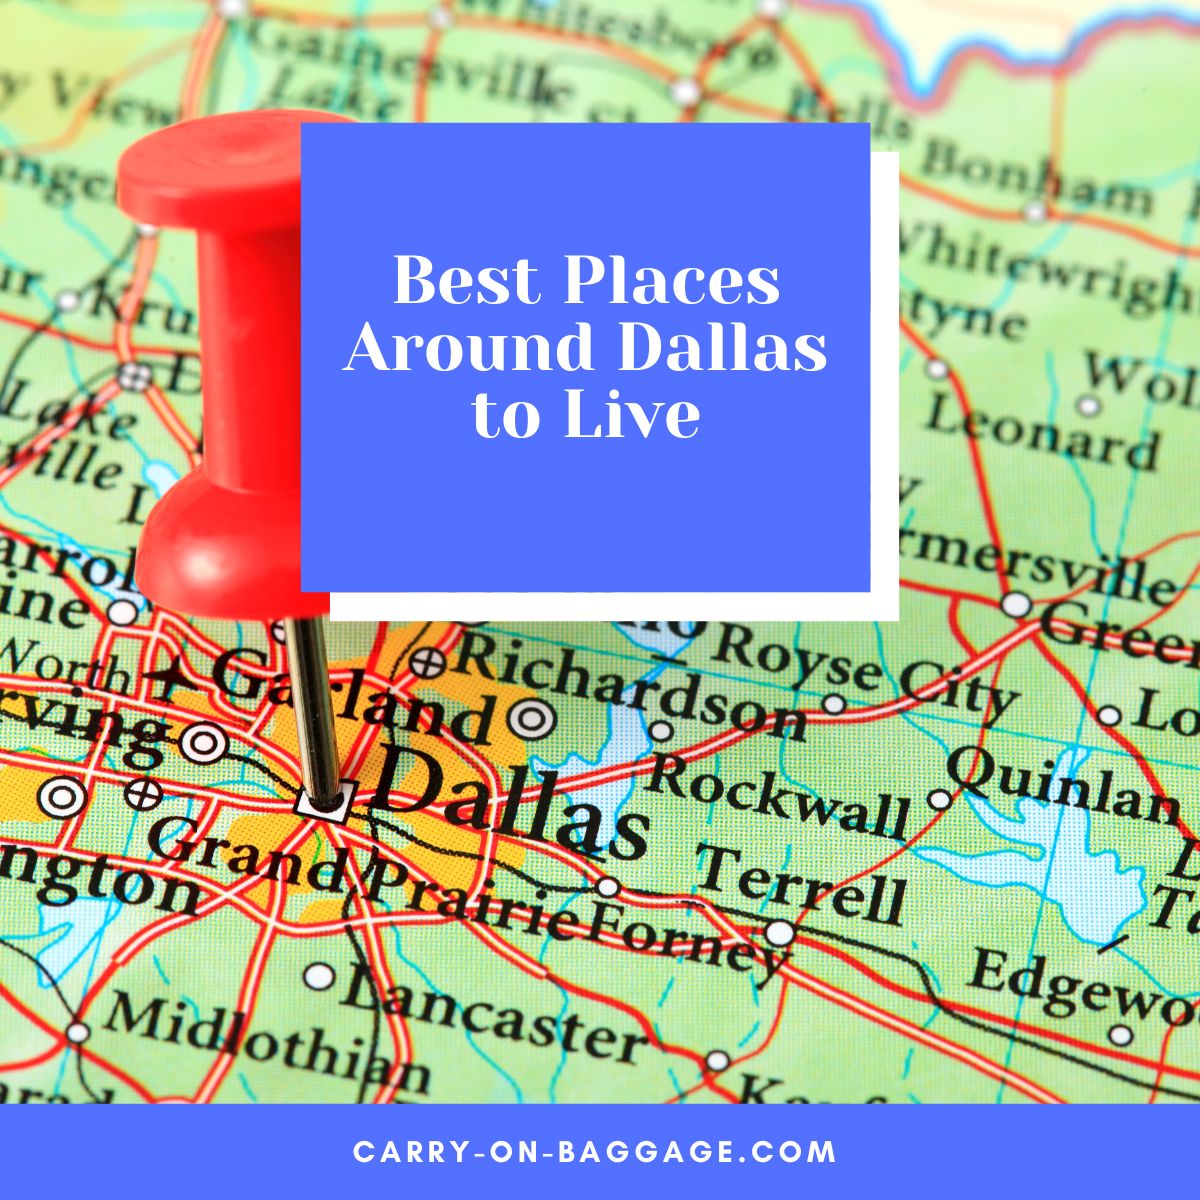 Best Places Around Dallas to Live